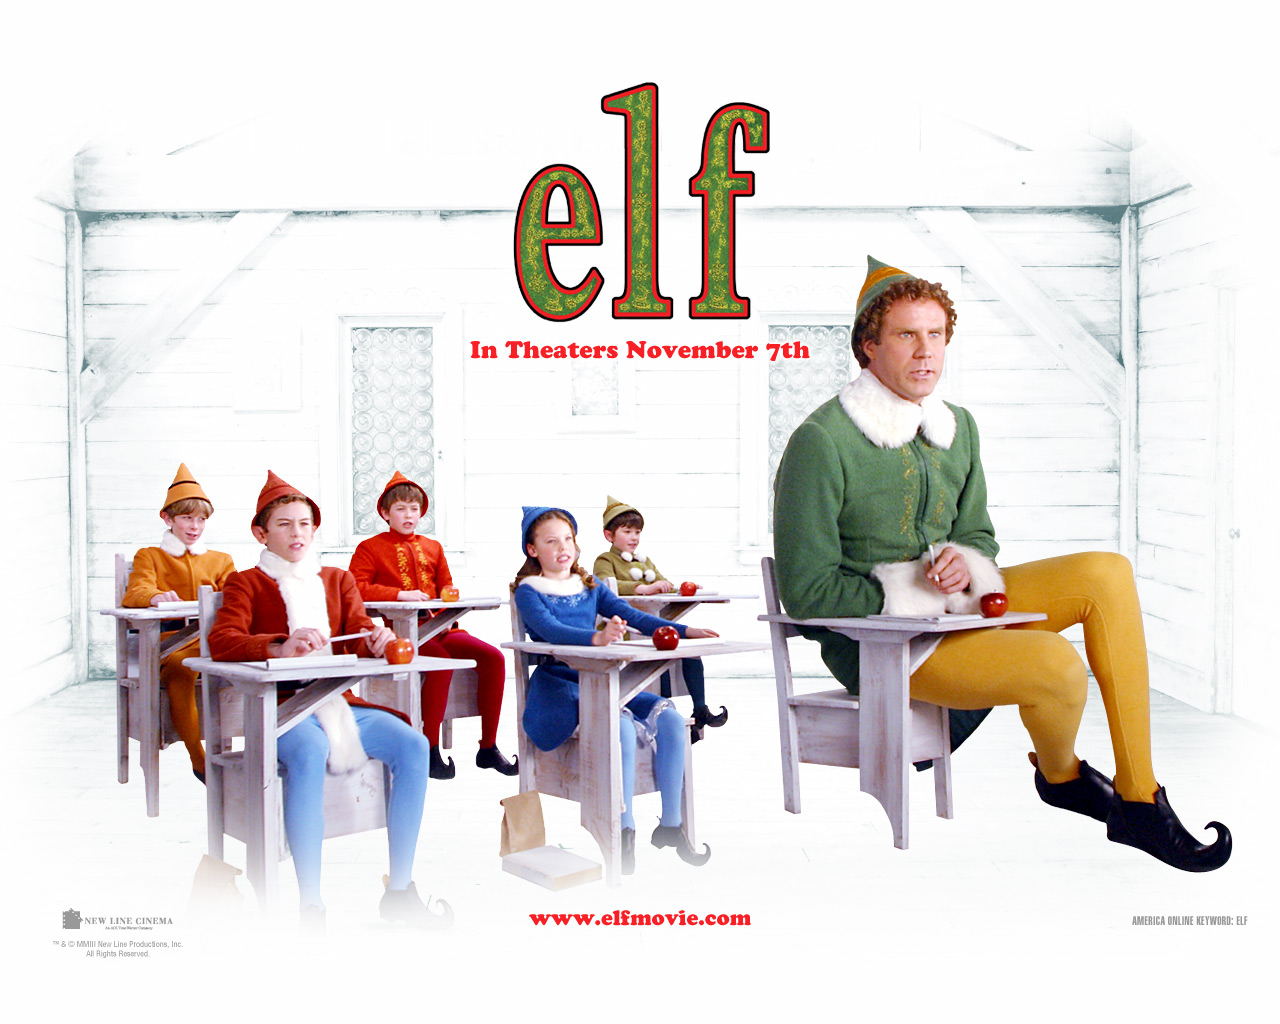 Things We Can Learn From 'Elf' The Movie